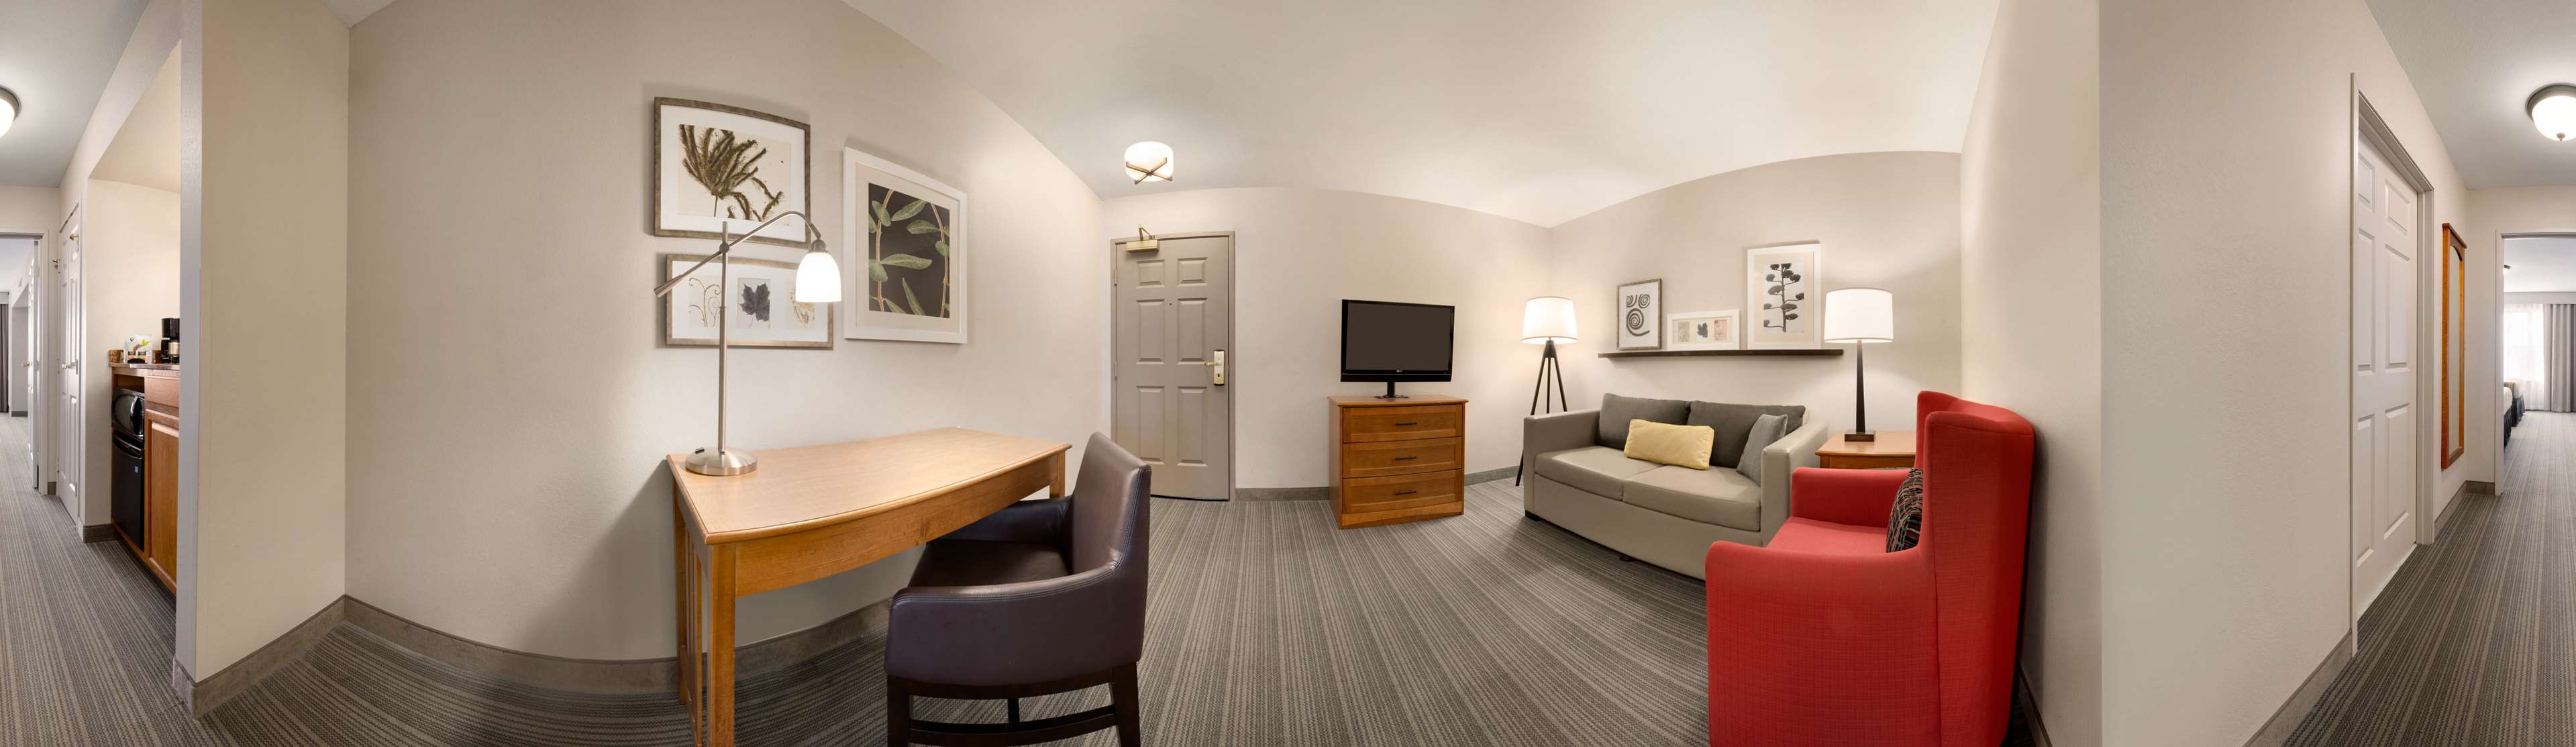 Country Inn & Suites by Radisson, Portage, IN Photo